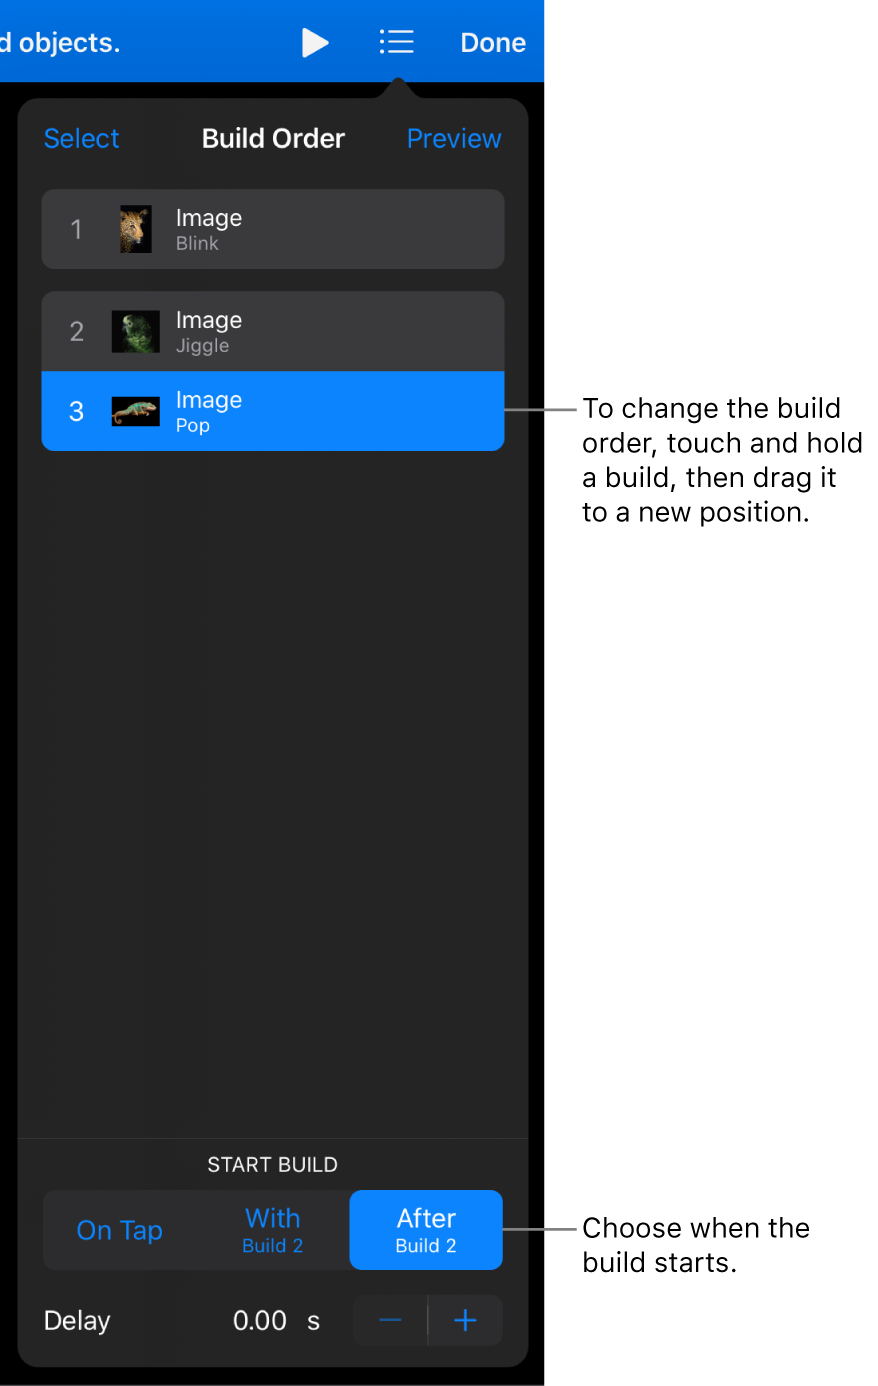 The Build Order list showing build in effects with yellow badges and build out effects with gray badges.